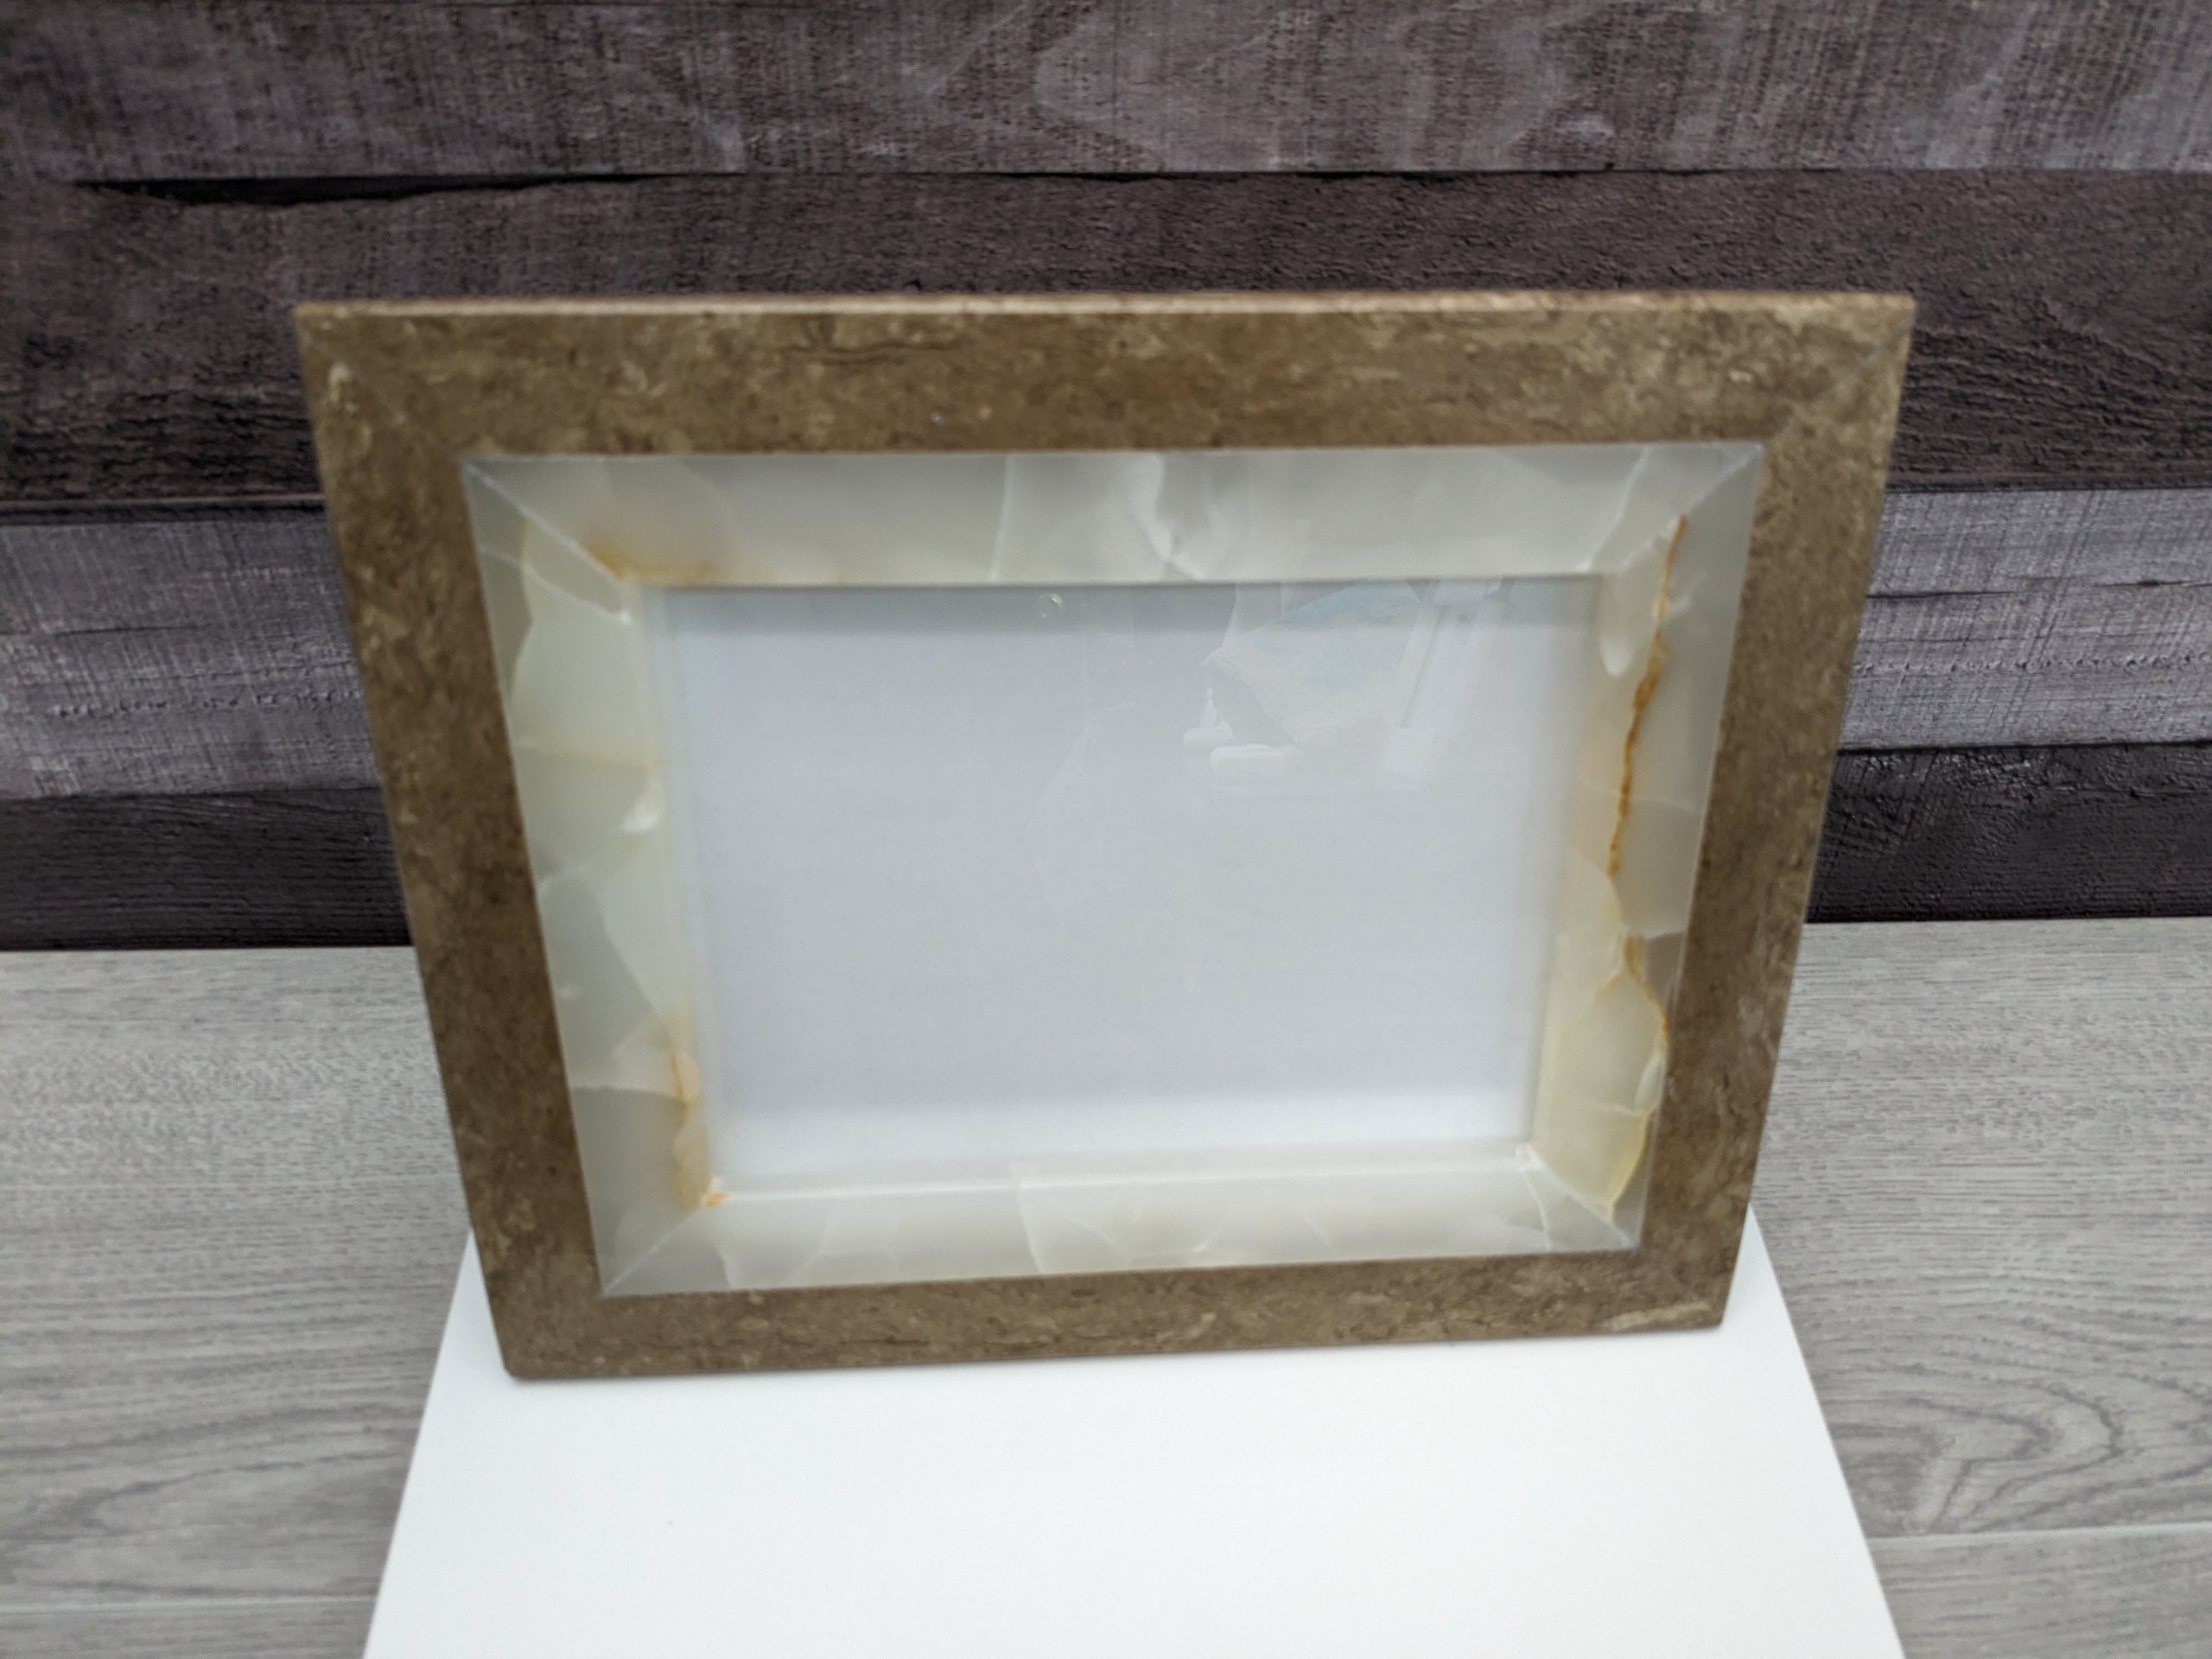 Travertine and Onyx Frame with Glass Covering and a Travertine Stone Stand. Handmade in Mexico. We package and ship from the USA. Buy now at www.felipeandgrace.com.